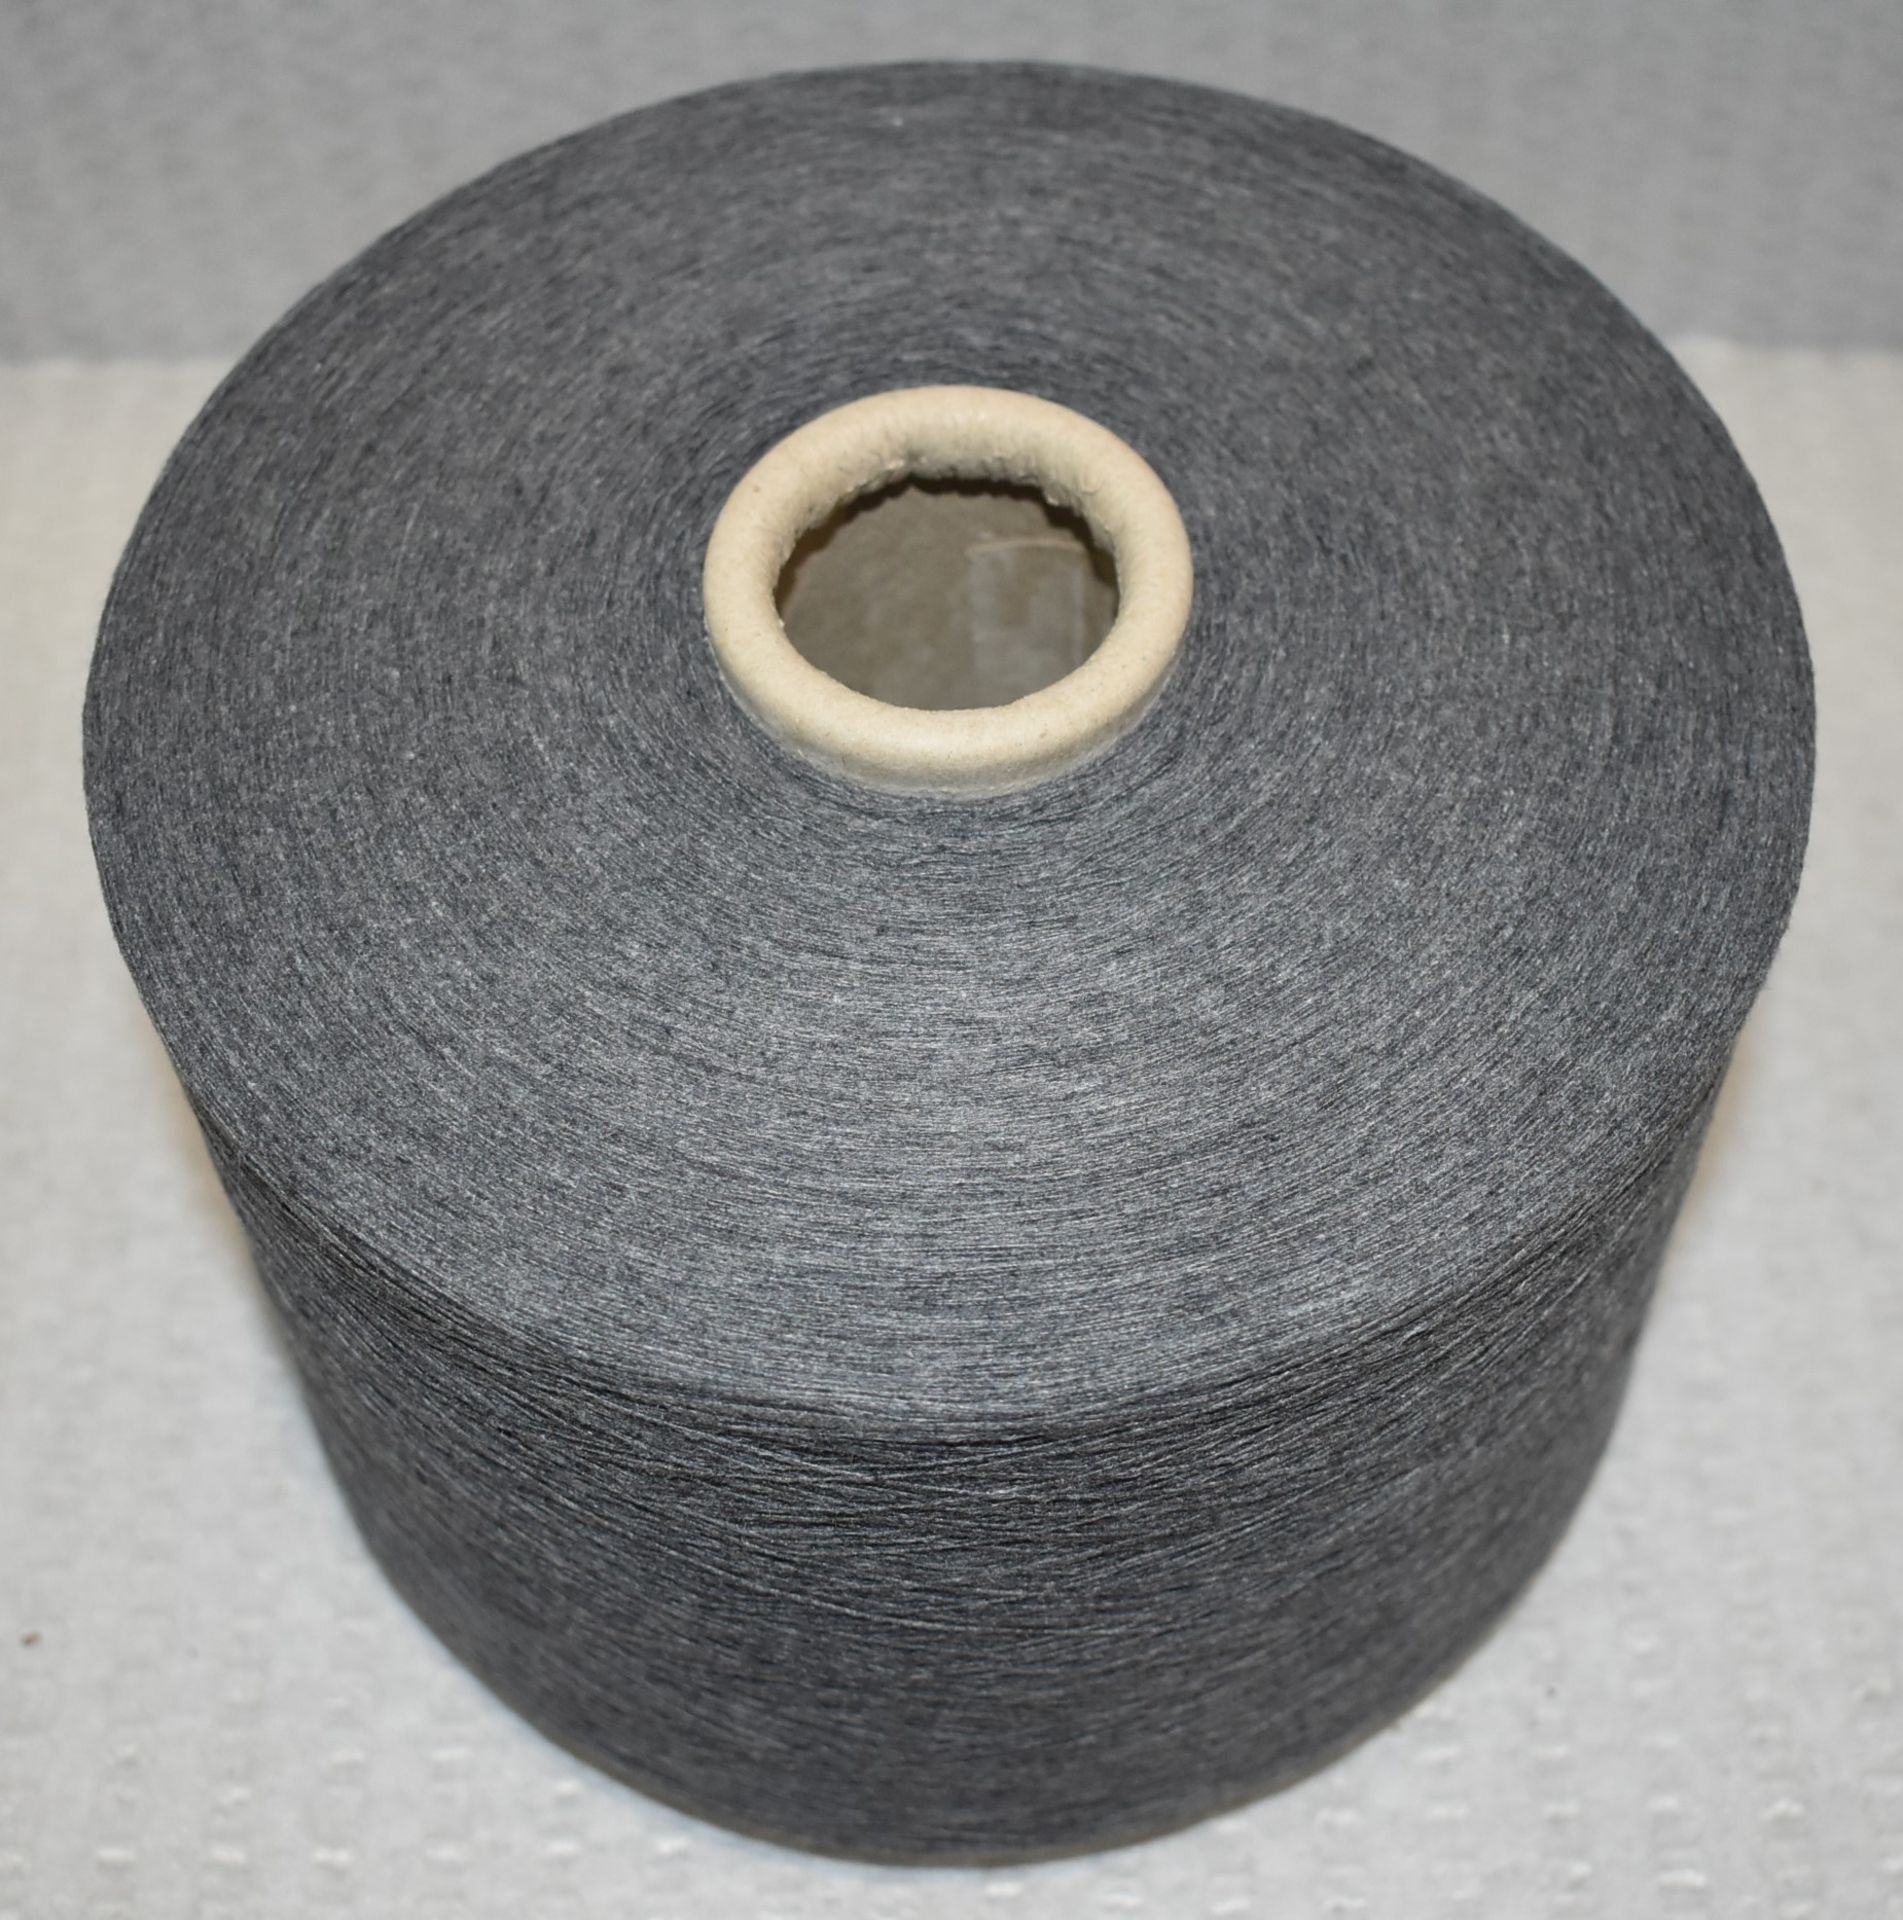 18 x Cones of 1/13 MicroCotton Knitting Yarn - Mid Grey - Approx Weight: 2,500g - New Stock ABL Yarn - Image 4 of 12